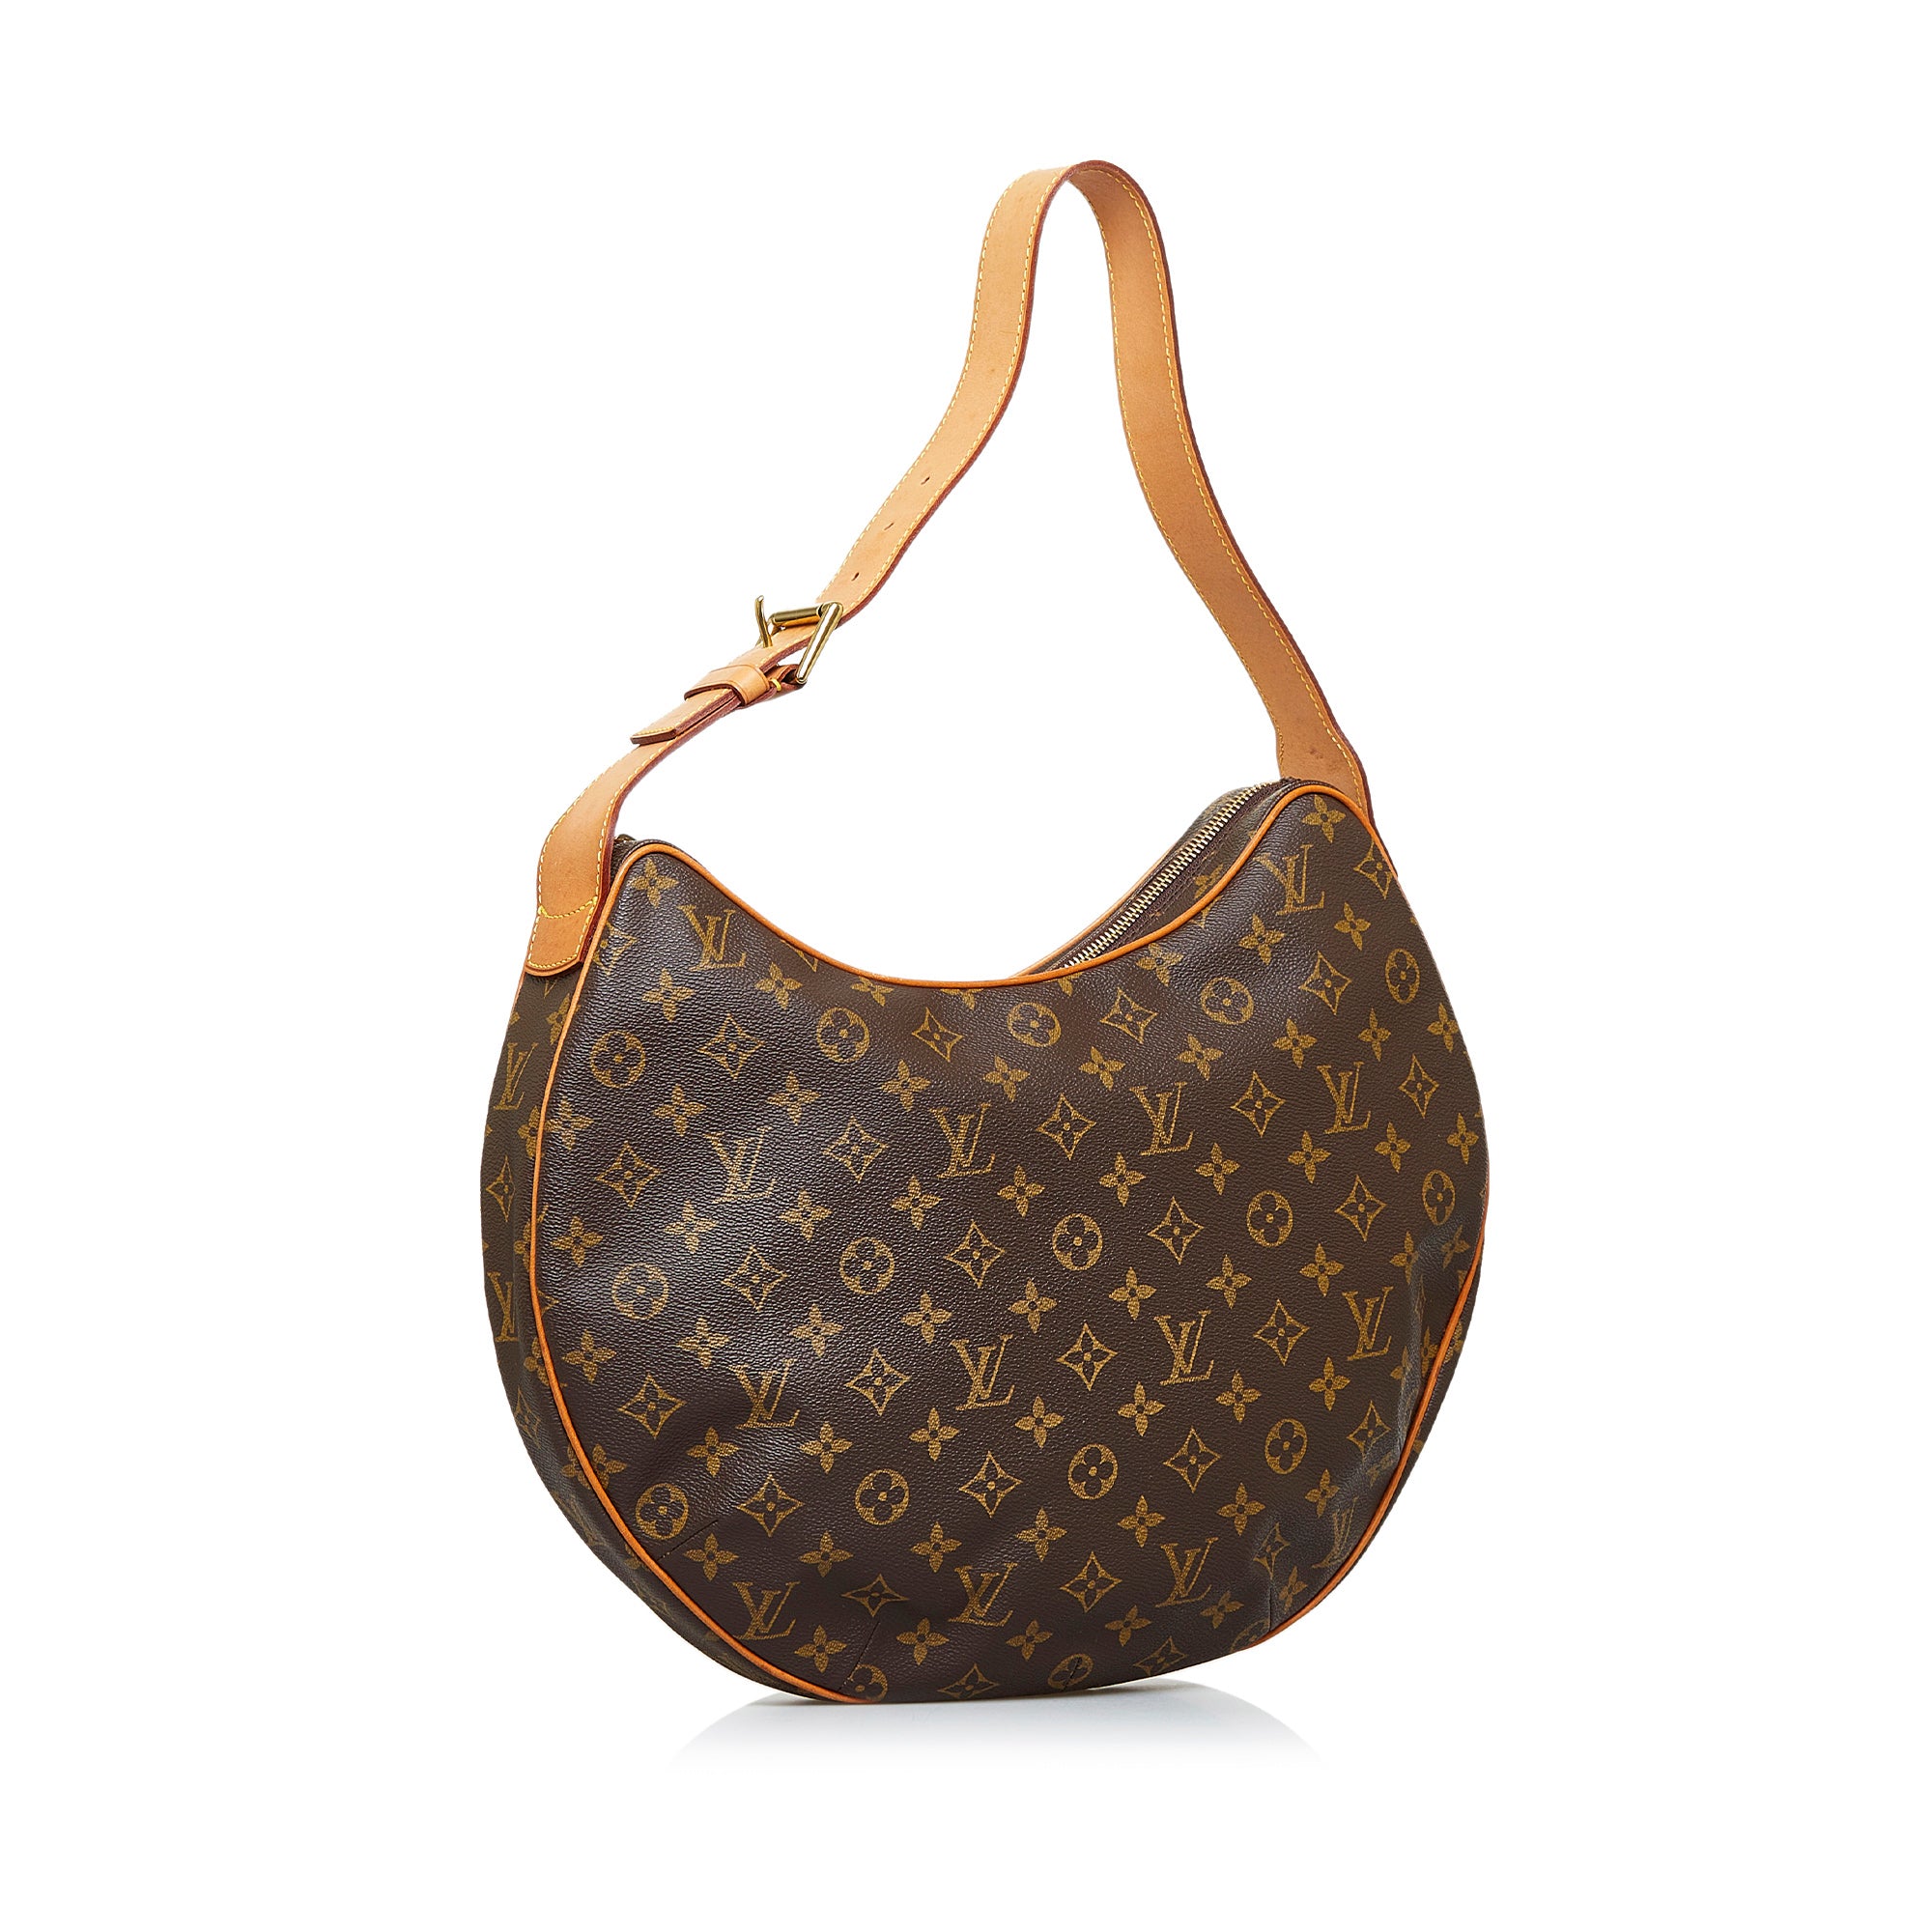 Louis Vuitton - Authenticated Croissant Handbag - Cloth Brown for Women, Very Good Condition